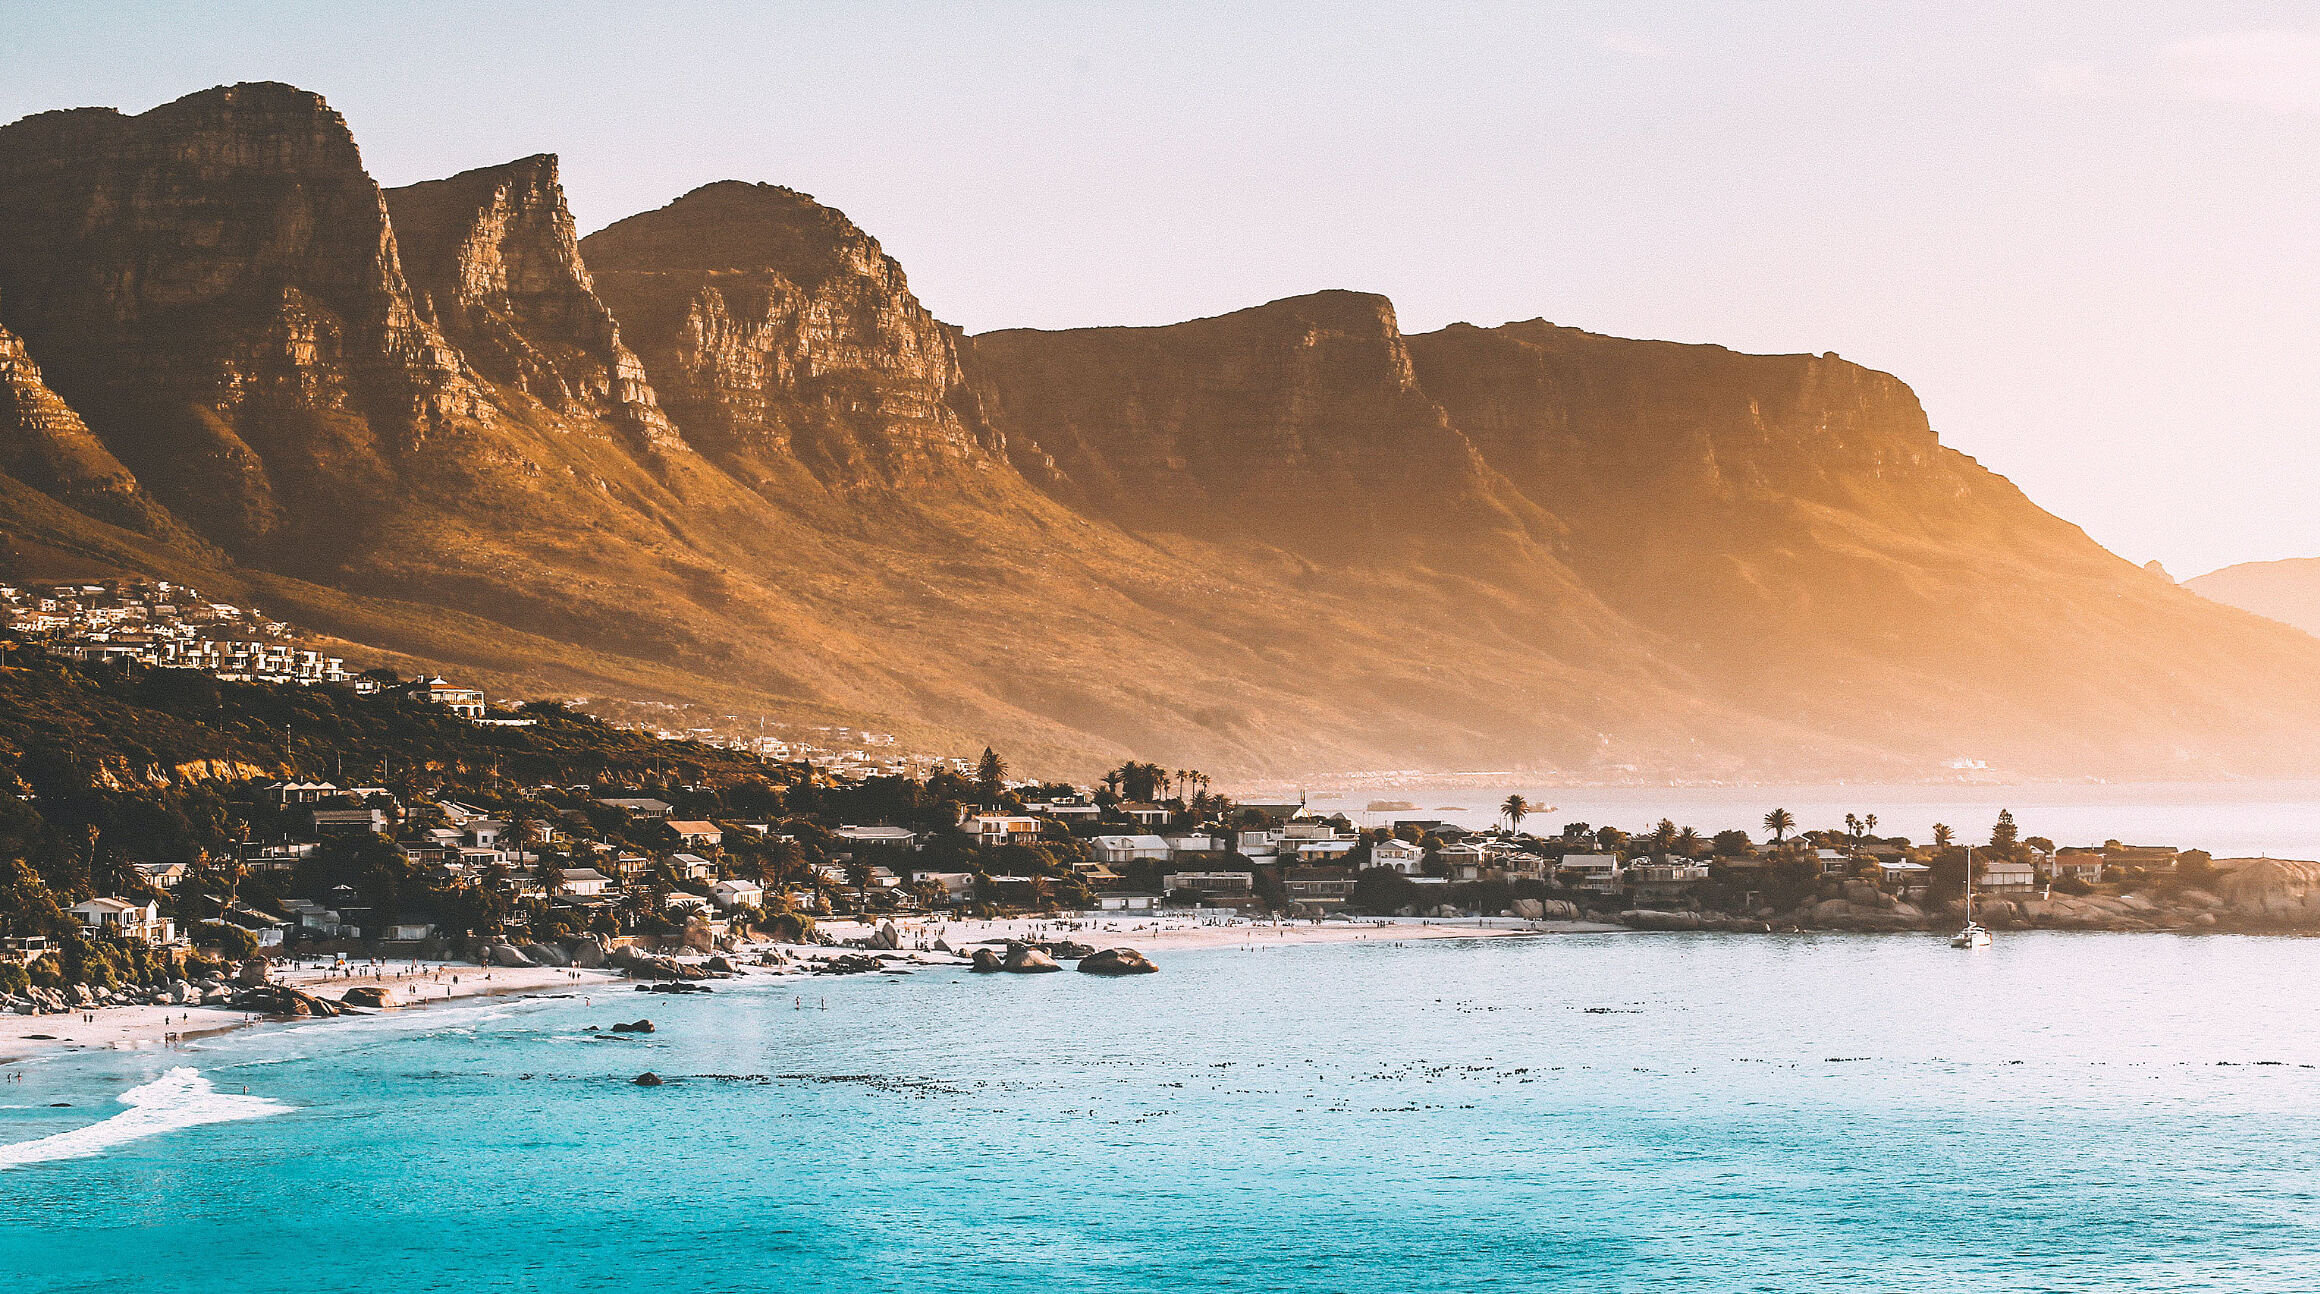 Sunset view of the Cape peninsula in Cape Town, South Africa